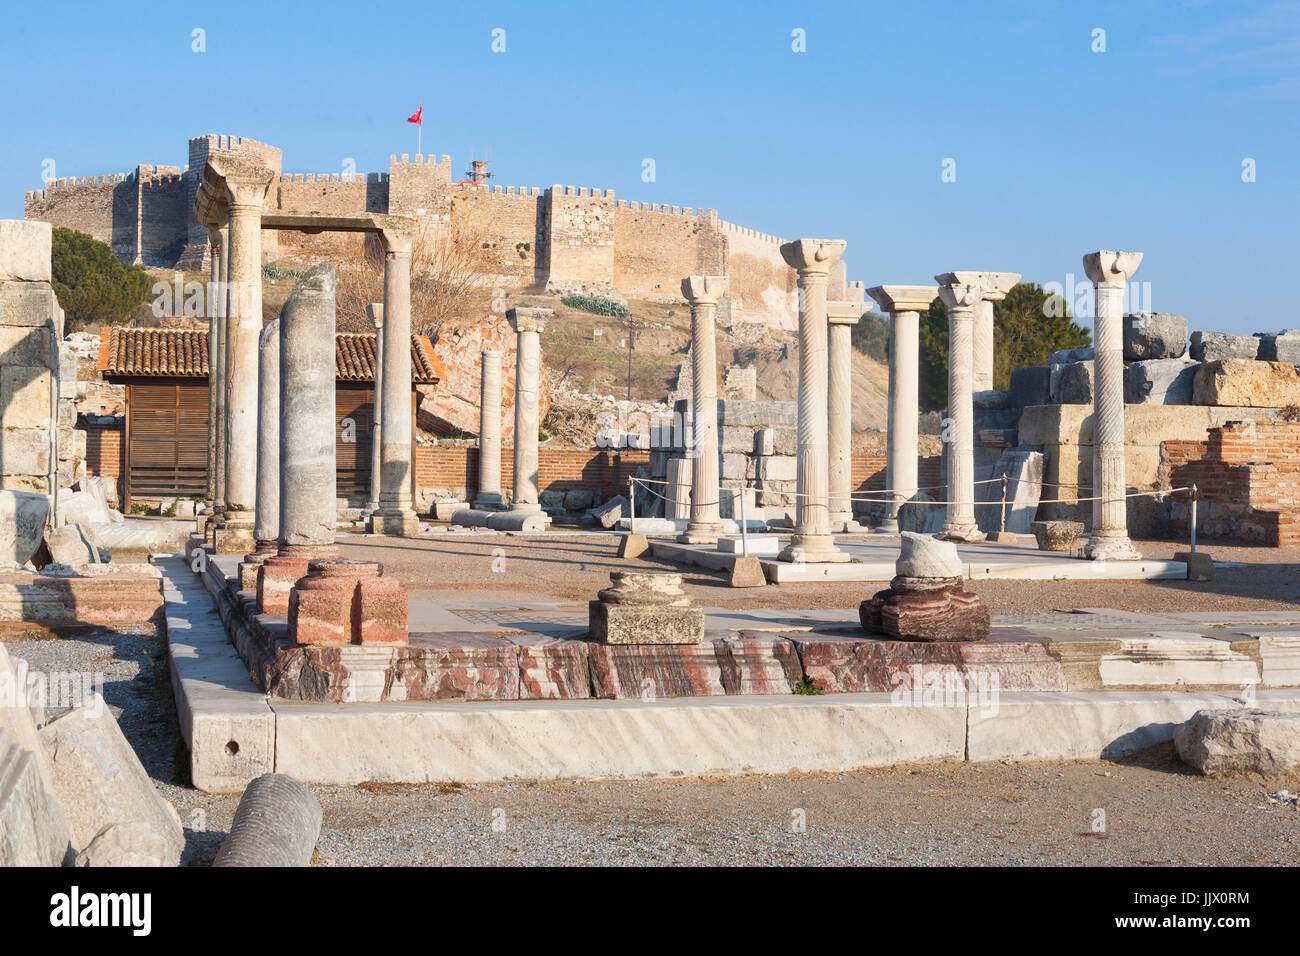 Roman square with stone pillars ruins in ephesus Archaeological site in turkey Stock Photo